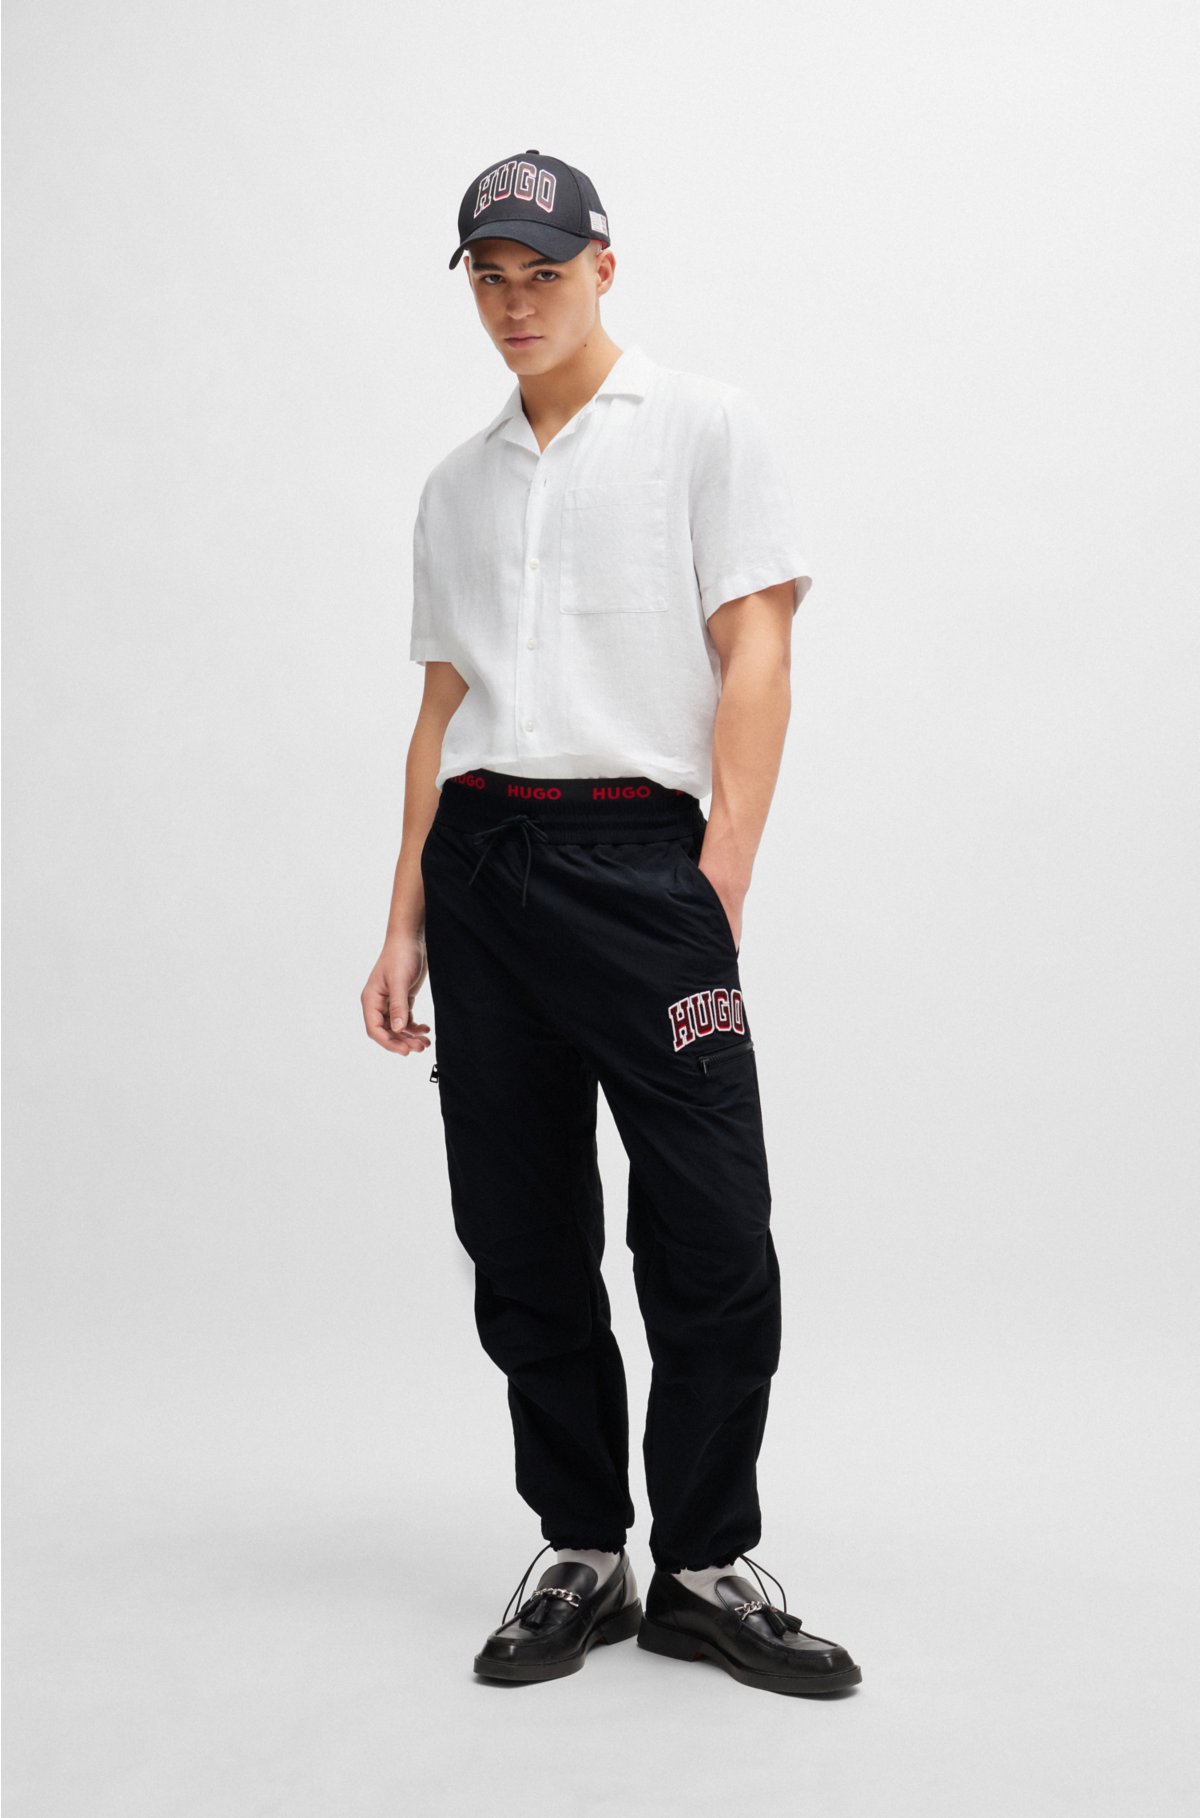 Relaxed-fit multi-occasional shirt in linen, White